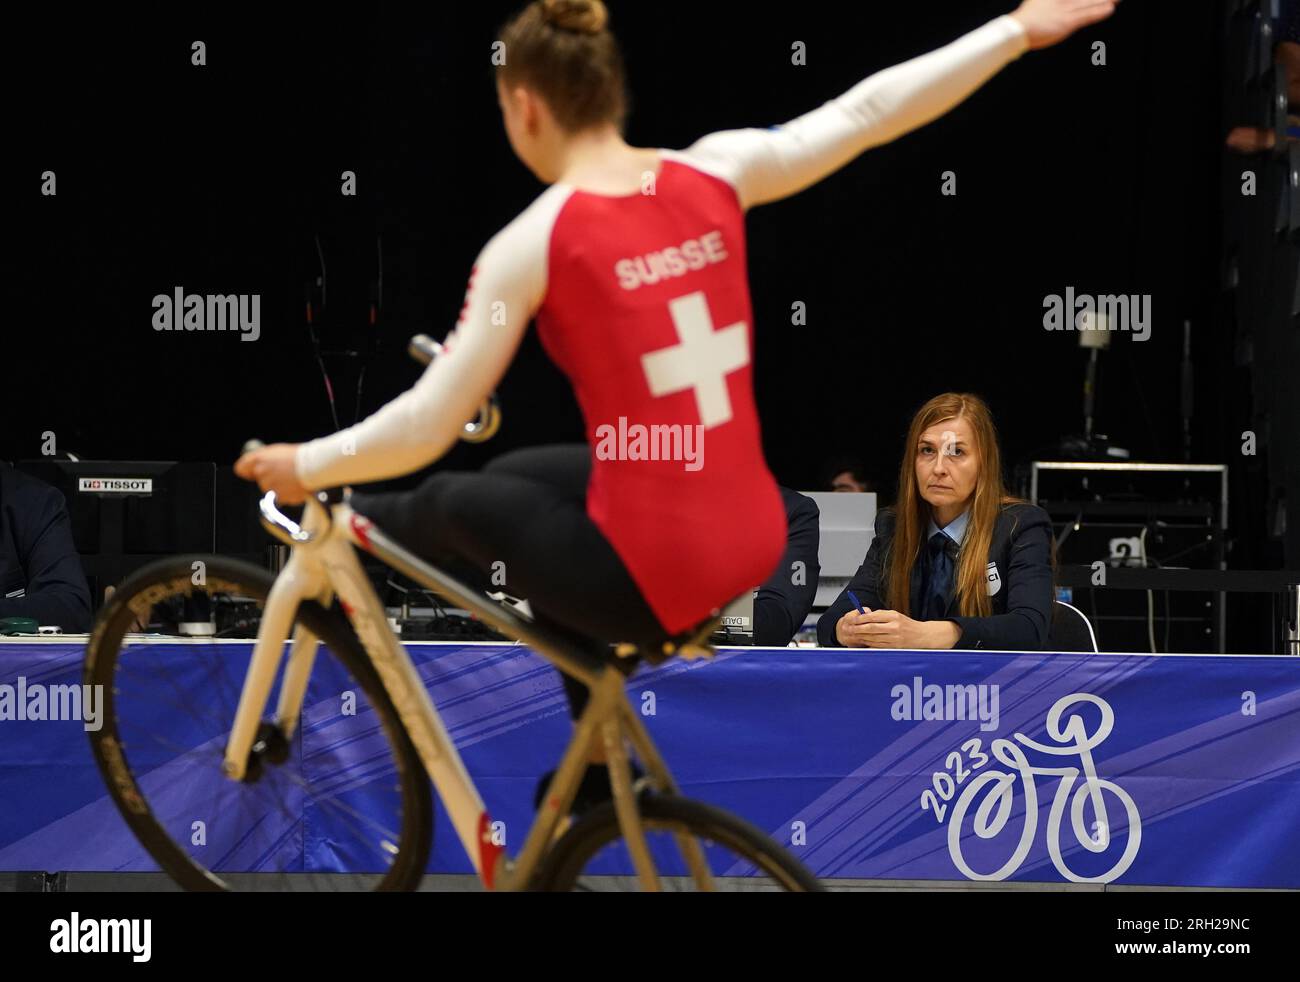 Judges watch Switzerlands Alessa Holtz during the Women Elite Artistic Cycling Single Qualification at Indoor Cycling during day eleven of the 2023 UCI Cycling World Championships at the Emirates Arena, Glasgow